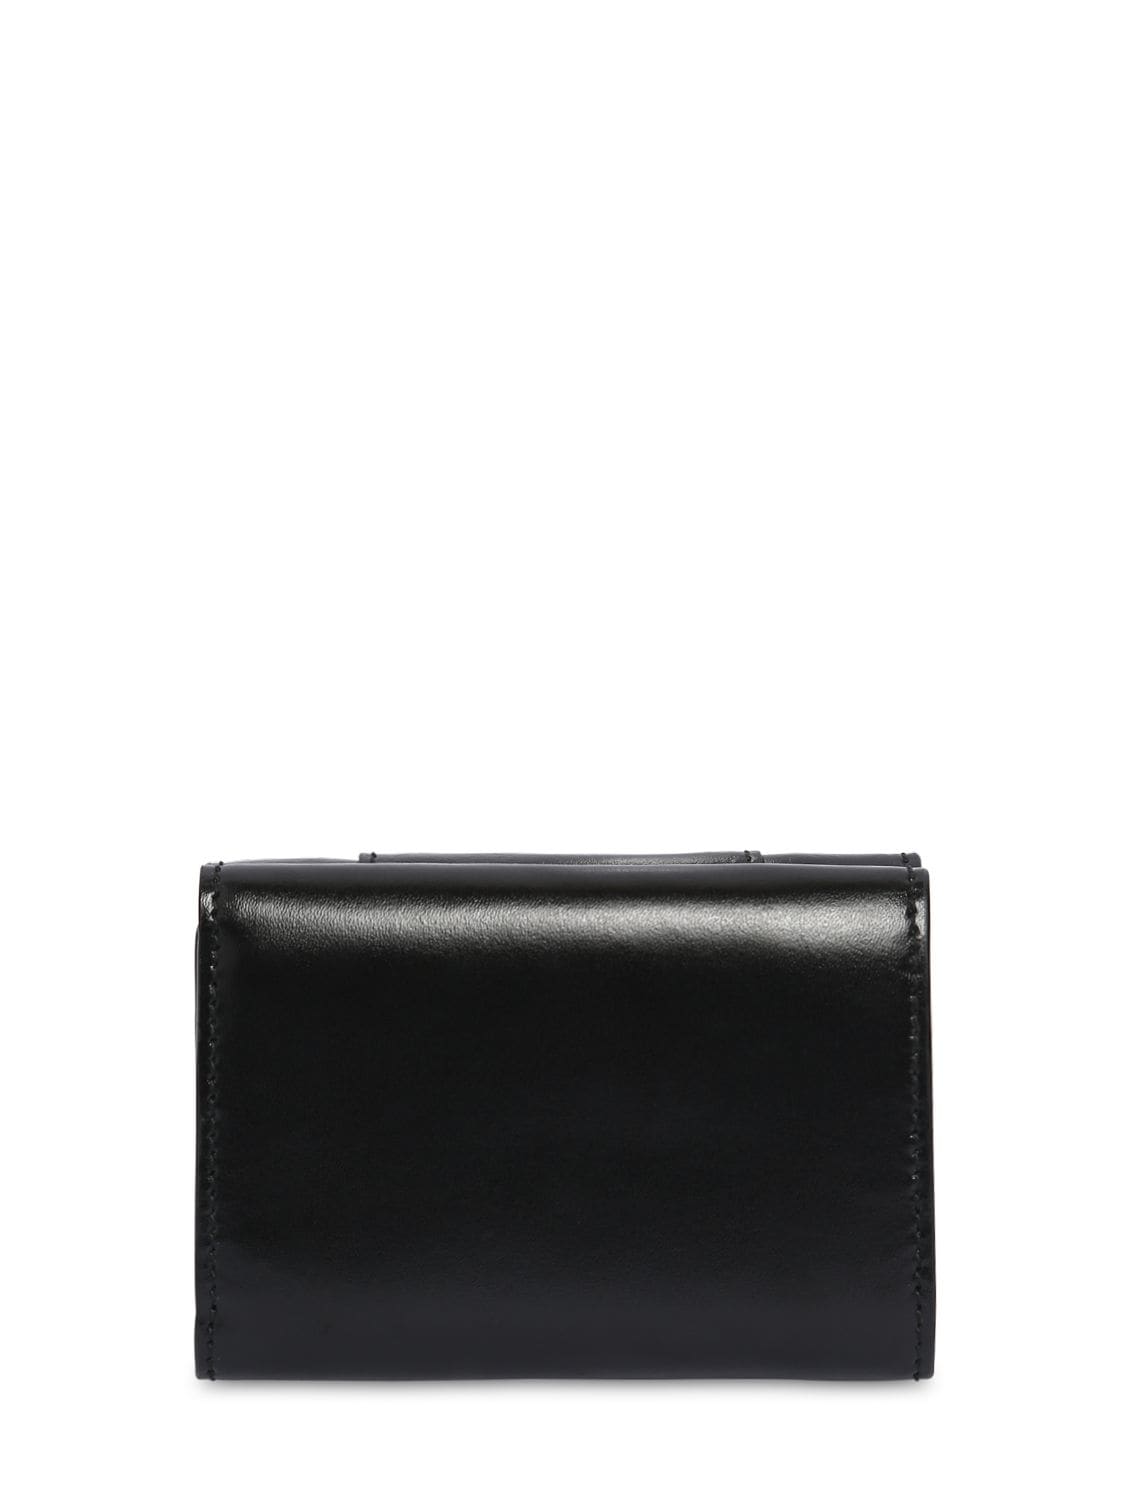 Shop Balenciaga Mini Hourglass Smooth Leather Wallet In Black